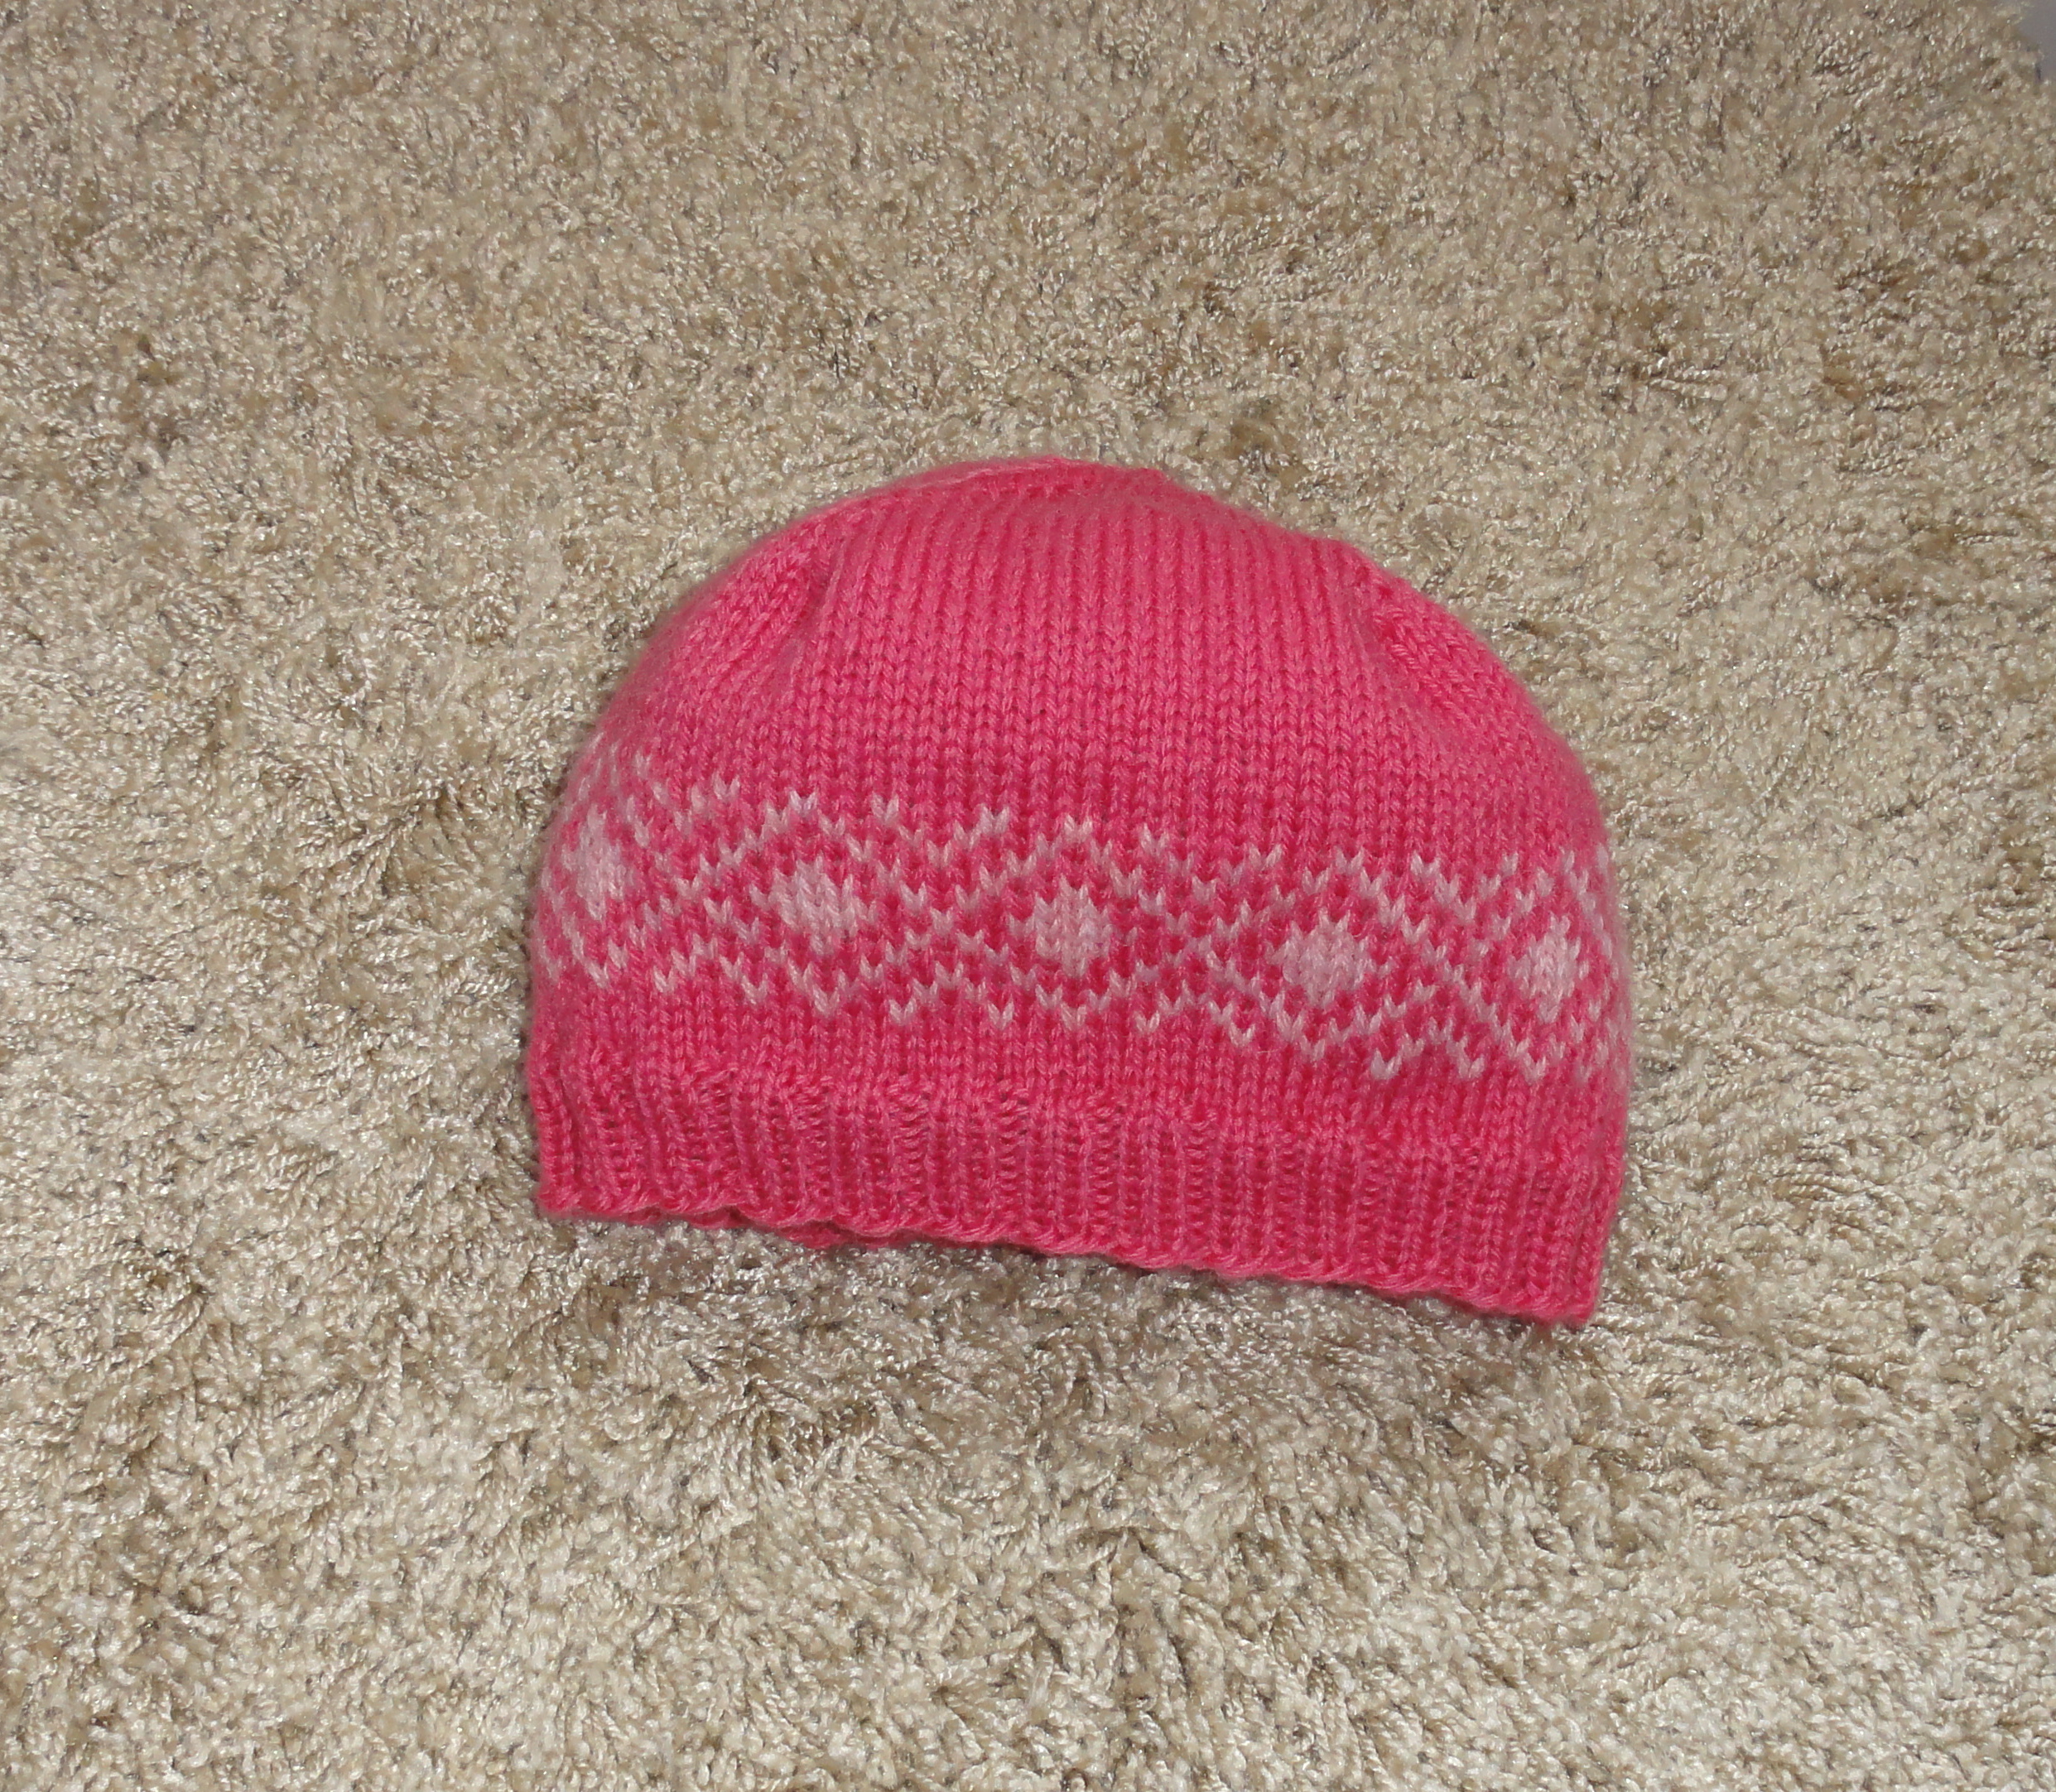 Charity Pattern - Basic Adults Knitted Beanie - DIY Craft Project